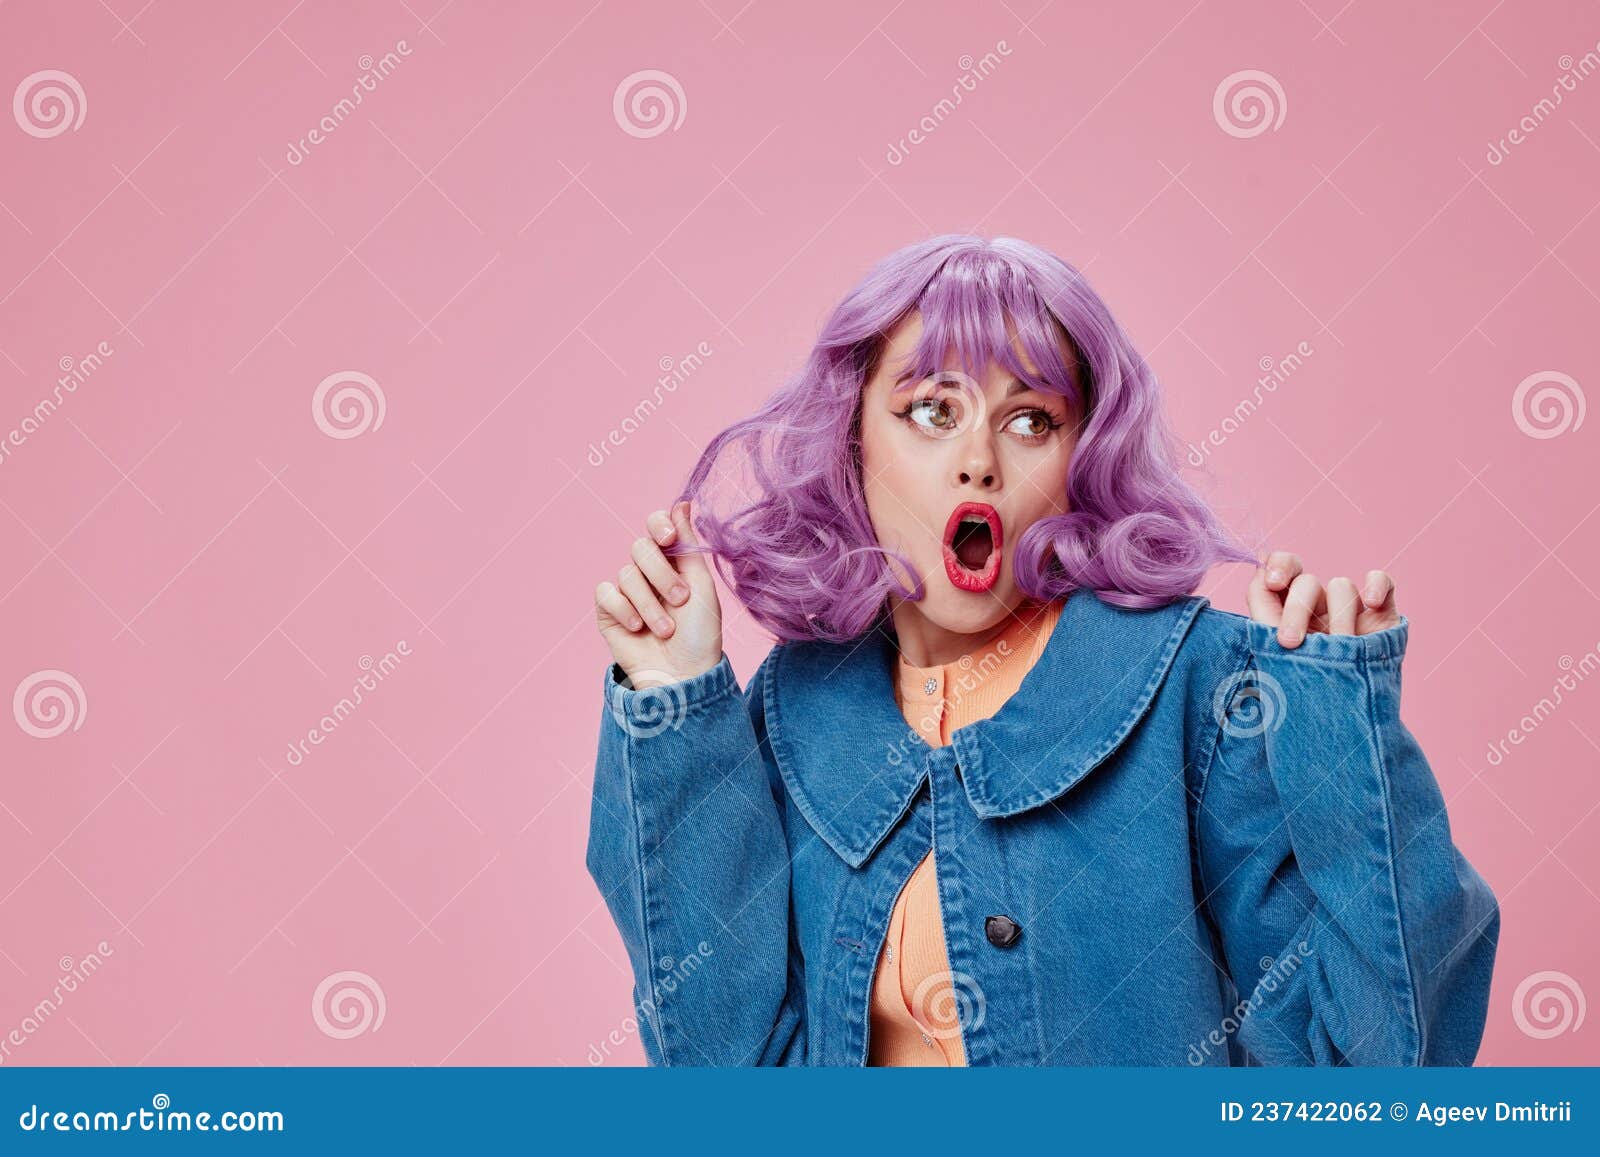 Purple hair with blue dress - wide 8